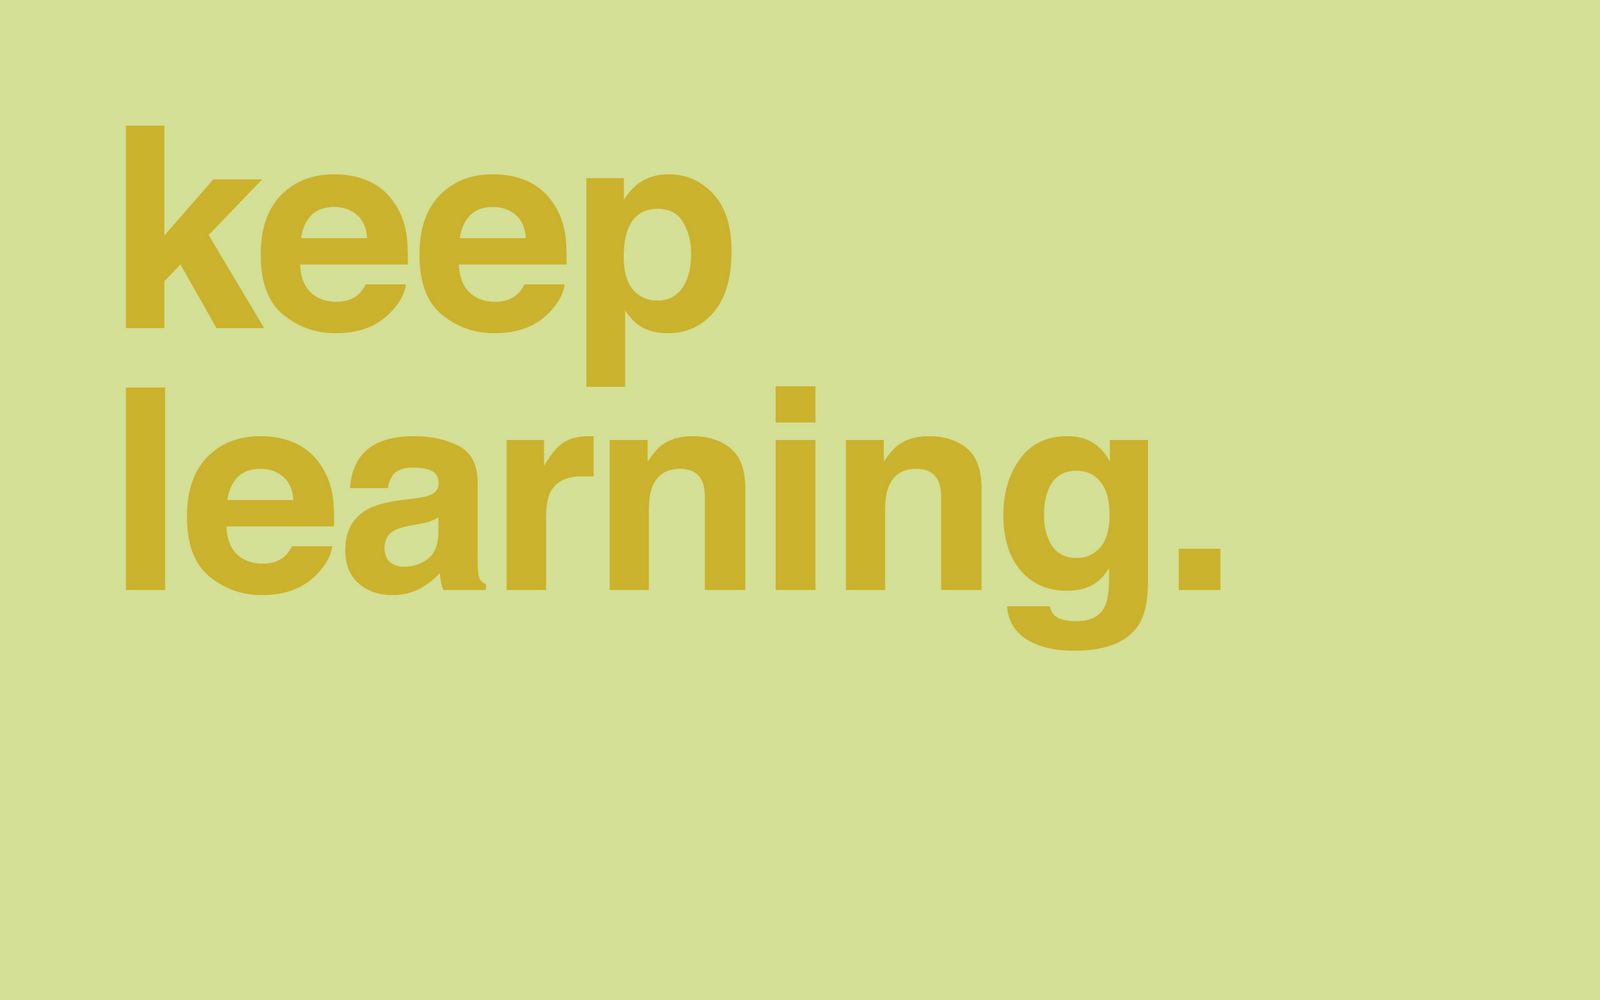 Keep Learning - A Yellow And Green Background